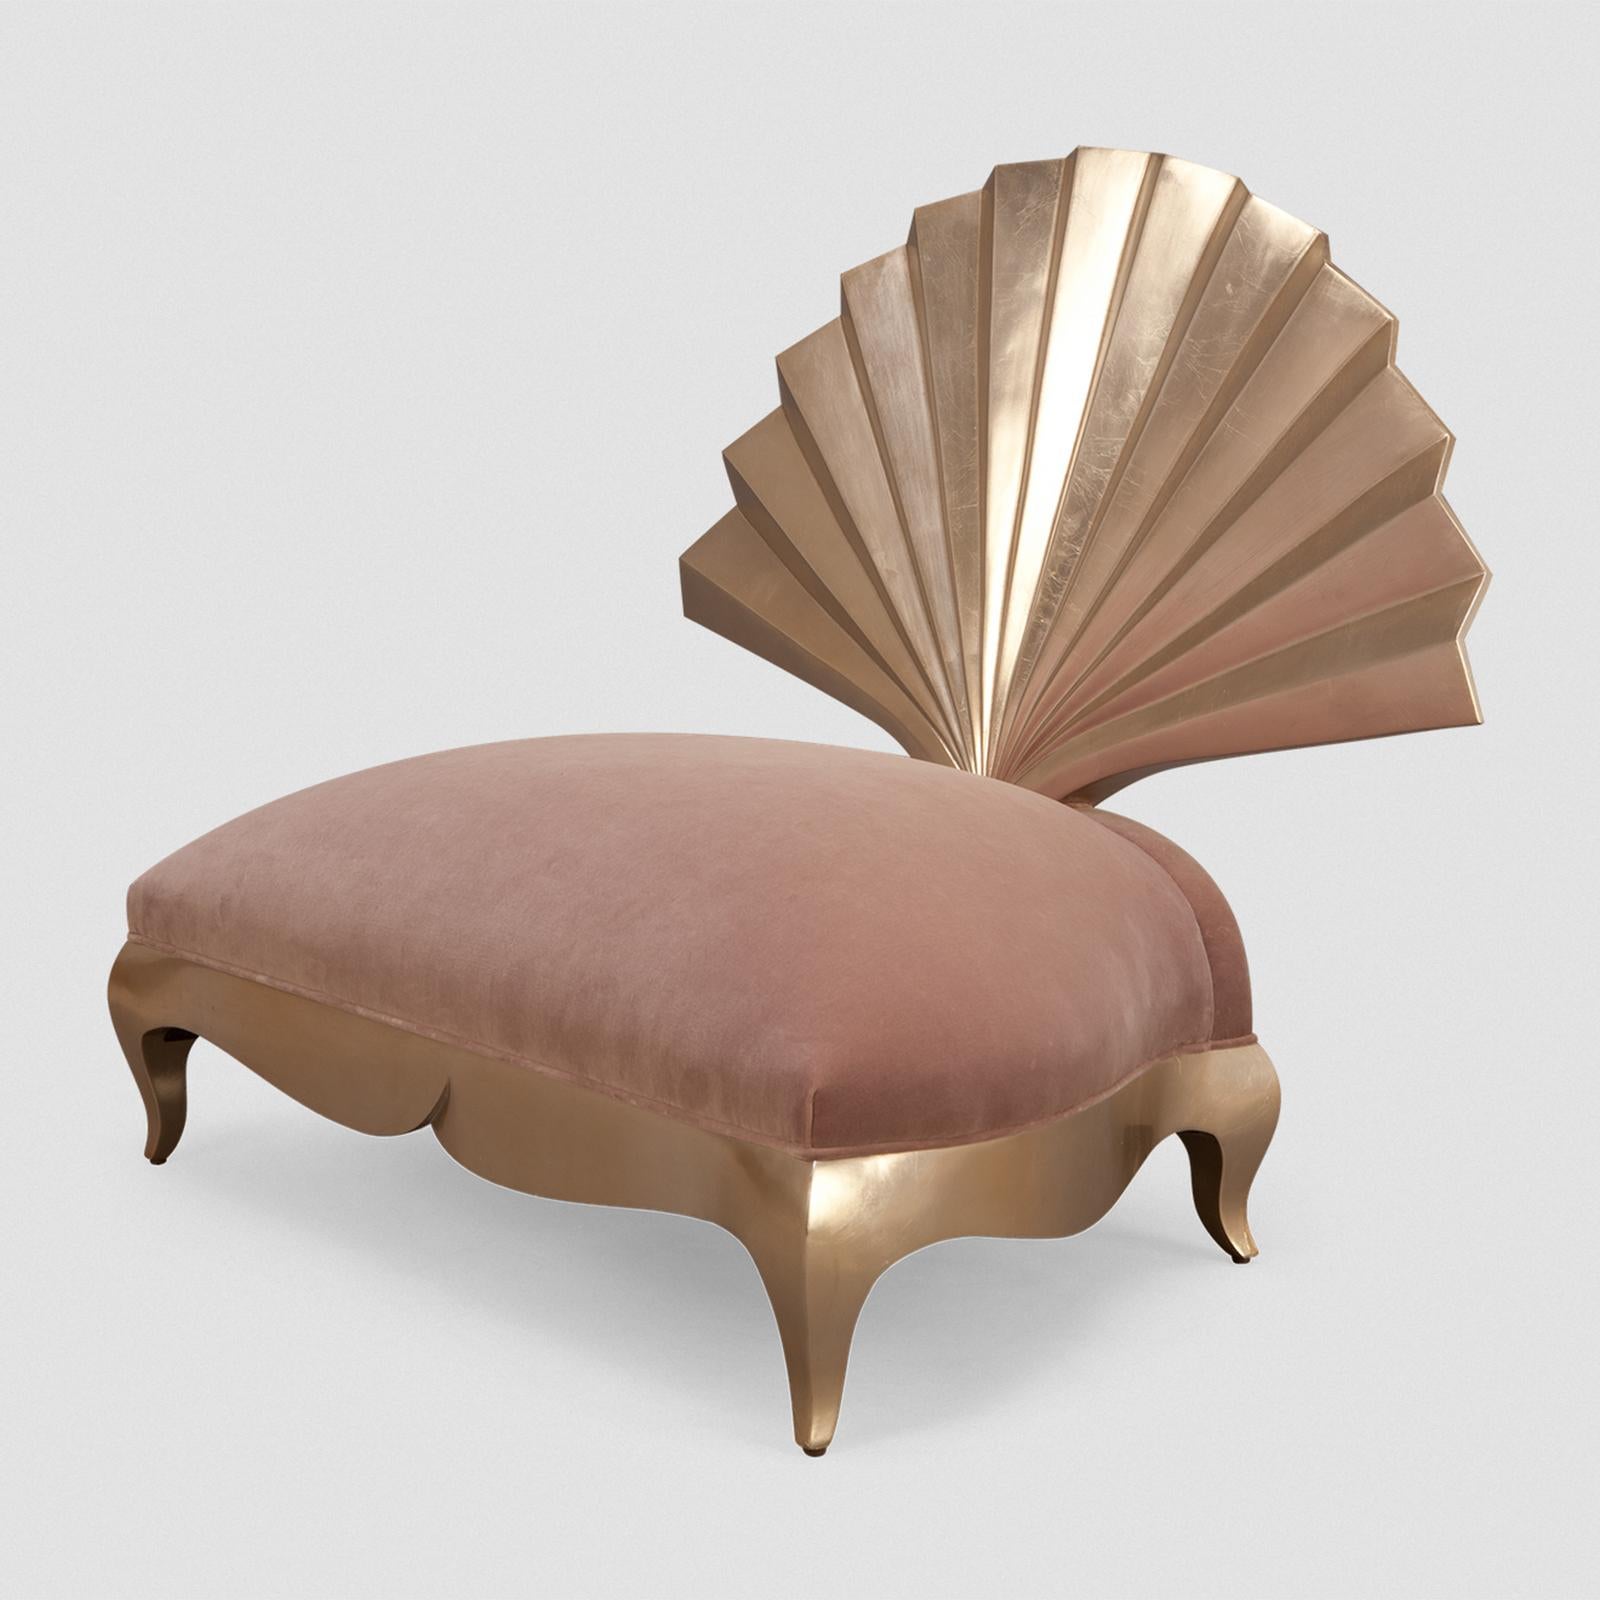 Armchair Eventail with structure in solid
mahogany wood, with hand carved back
and with structure in Gold Leaf finish hand-
painted. With upholstered seat covered
with high quality old pink velvet fabric.
Available with other fabrics on request
and